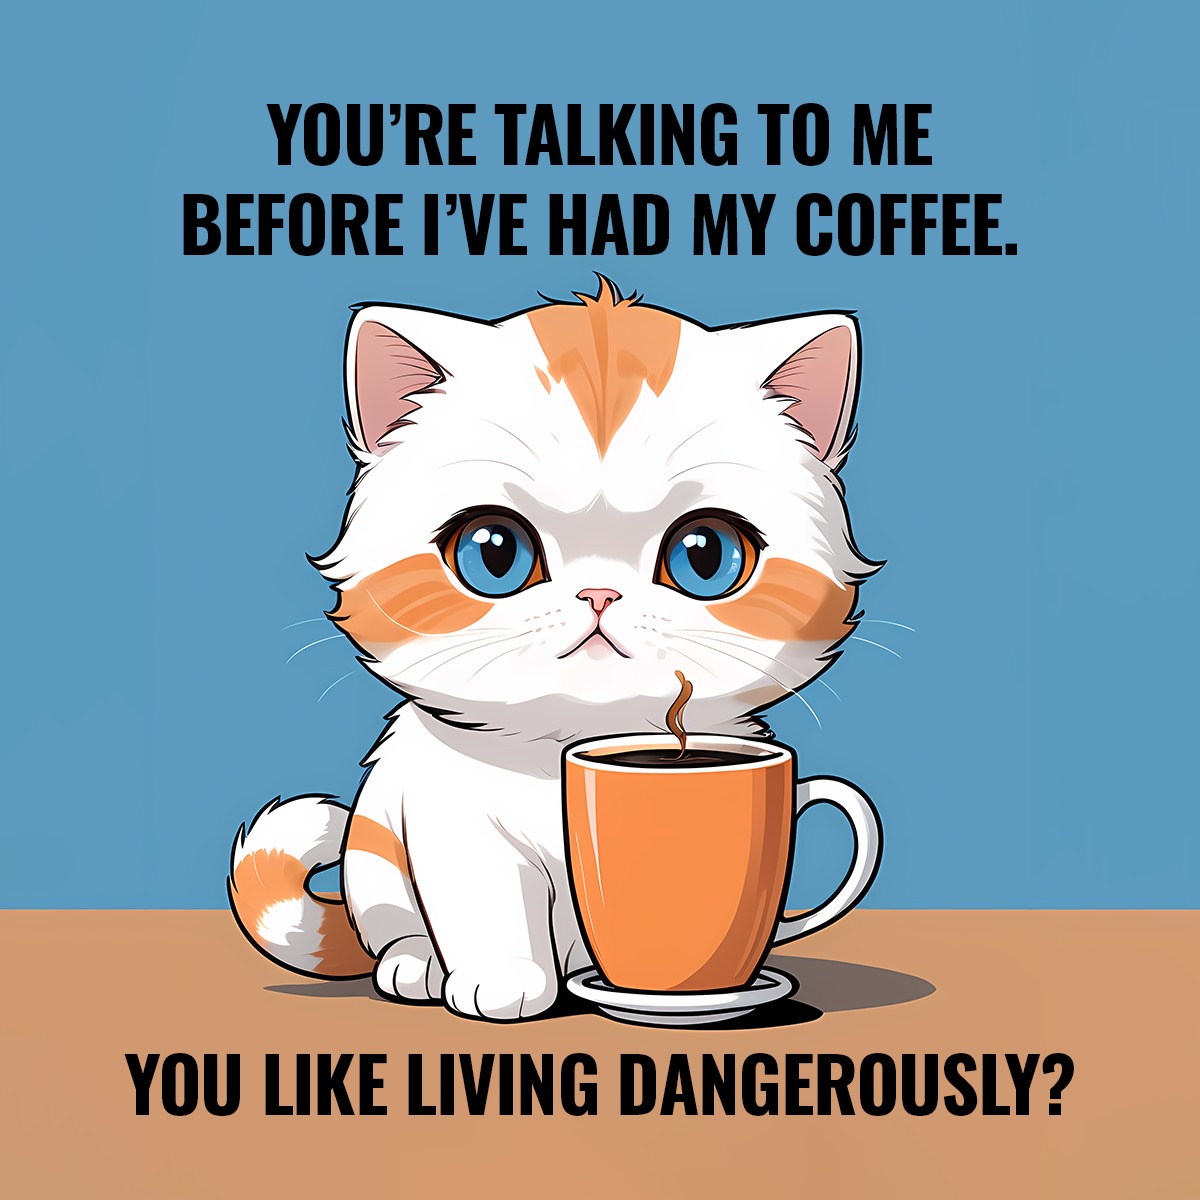 YOU'RE TALKING TO ME BEFORE I'VE HAD MY COFFEE. YOU LIKE LIVING DANGEROUSLY?